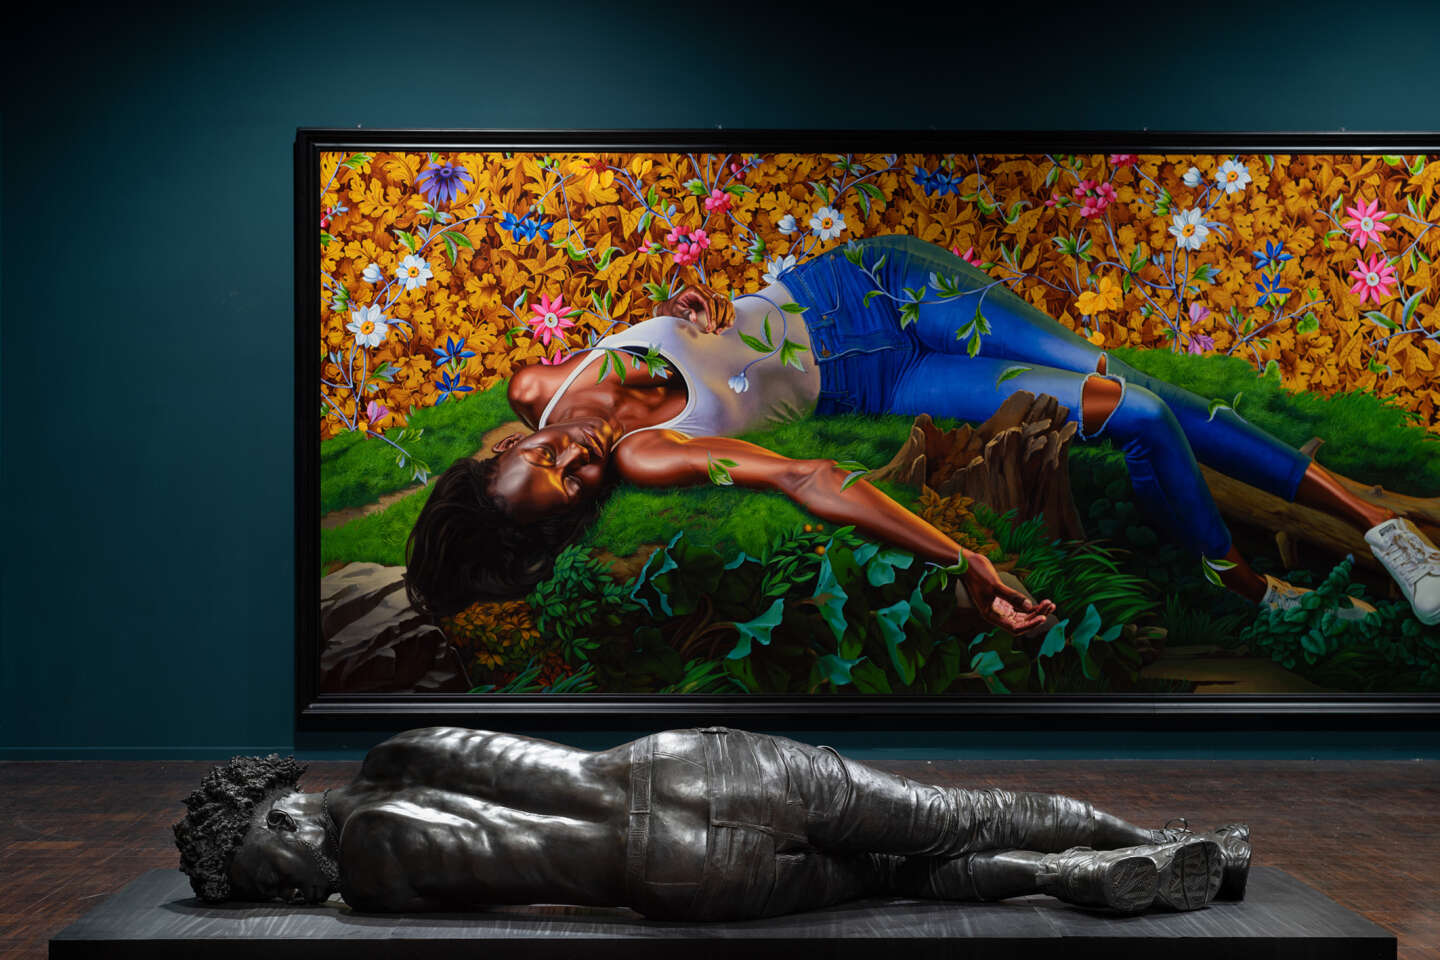 Kehinde Wiley unveils an "archeology of silence" against the backdrop